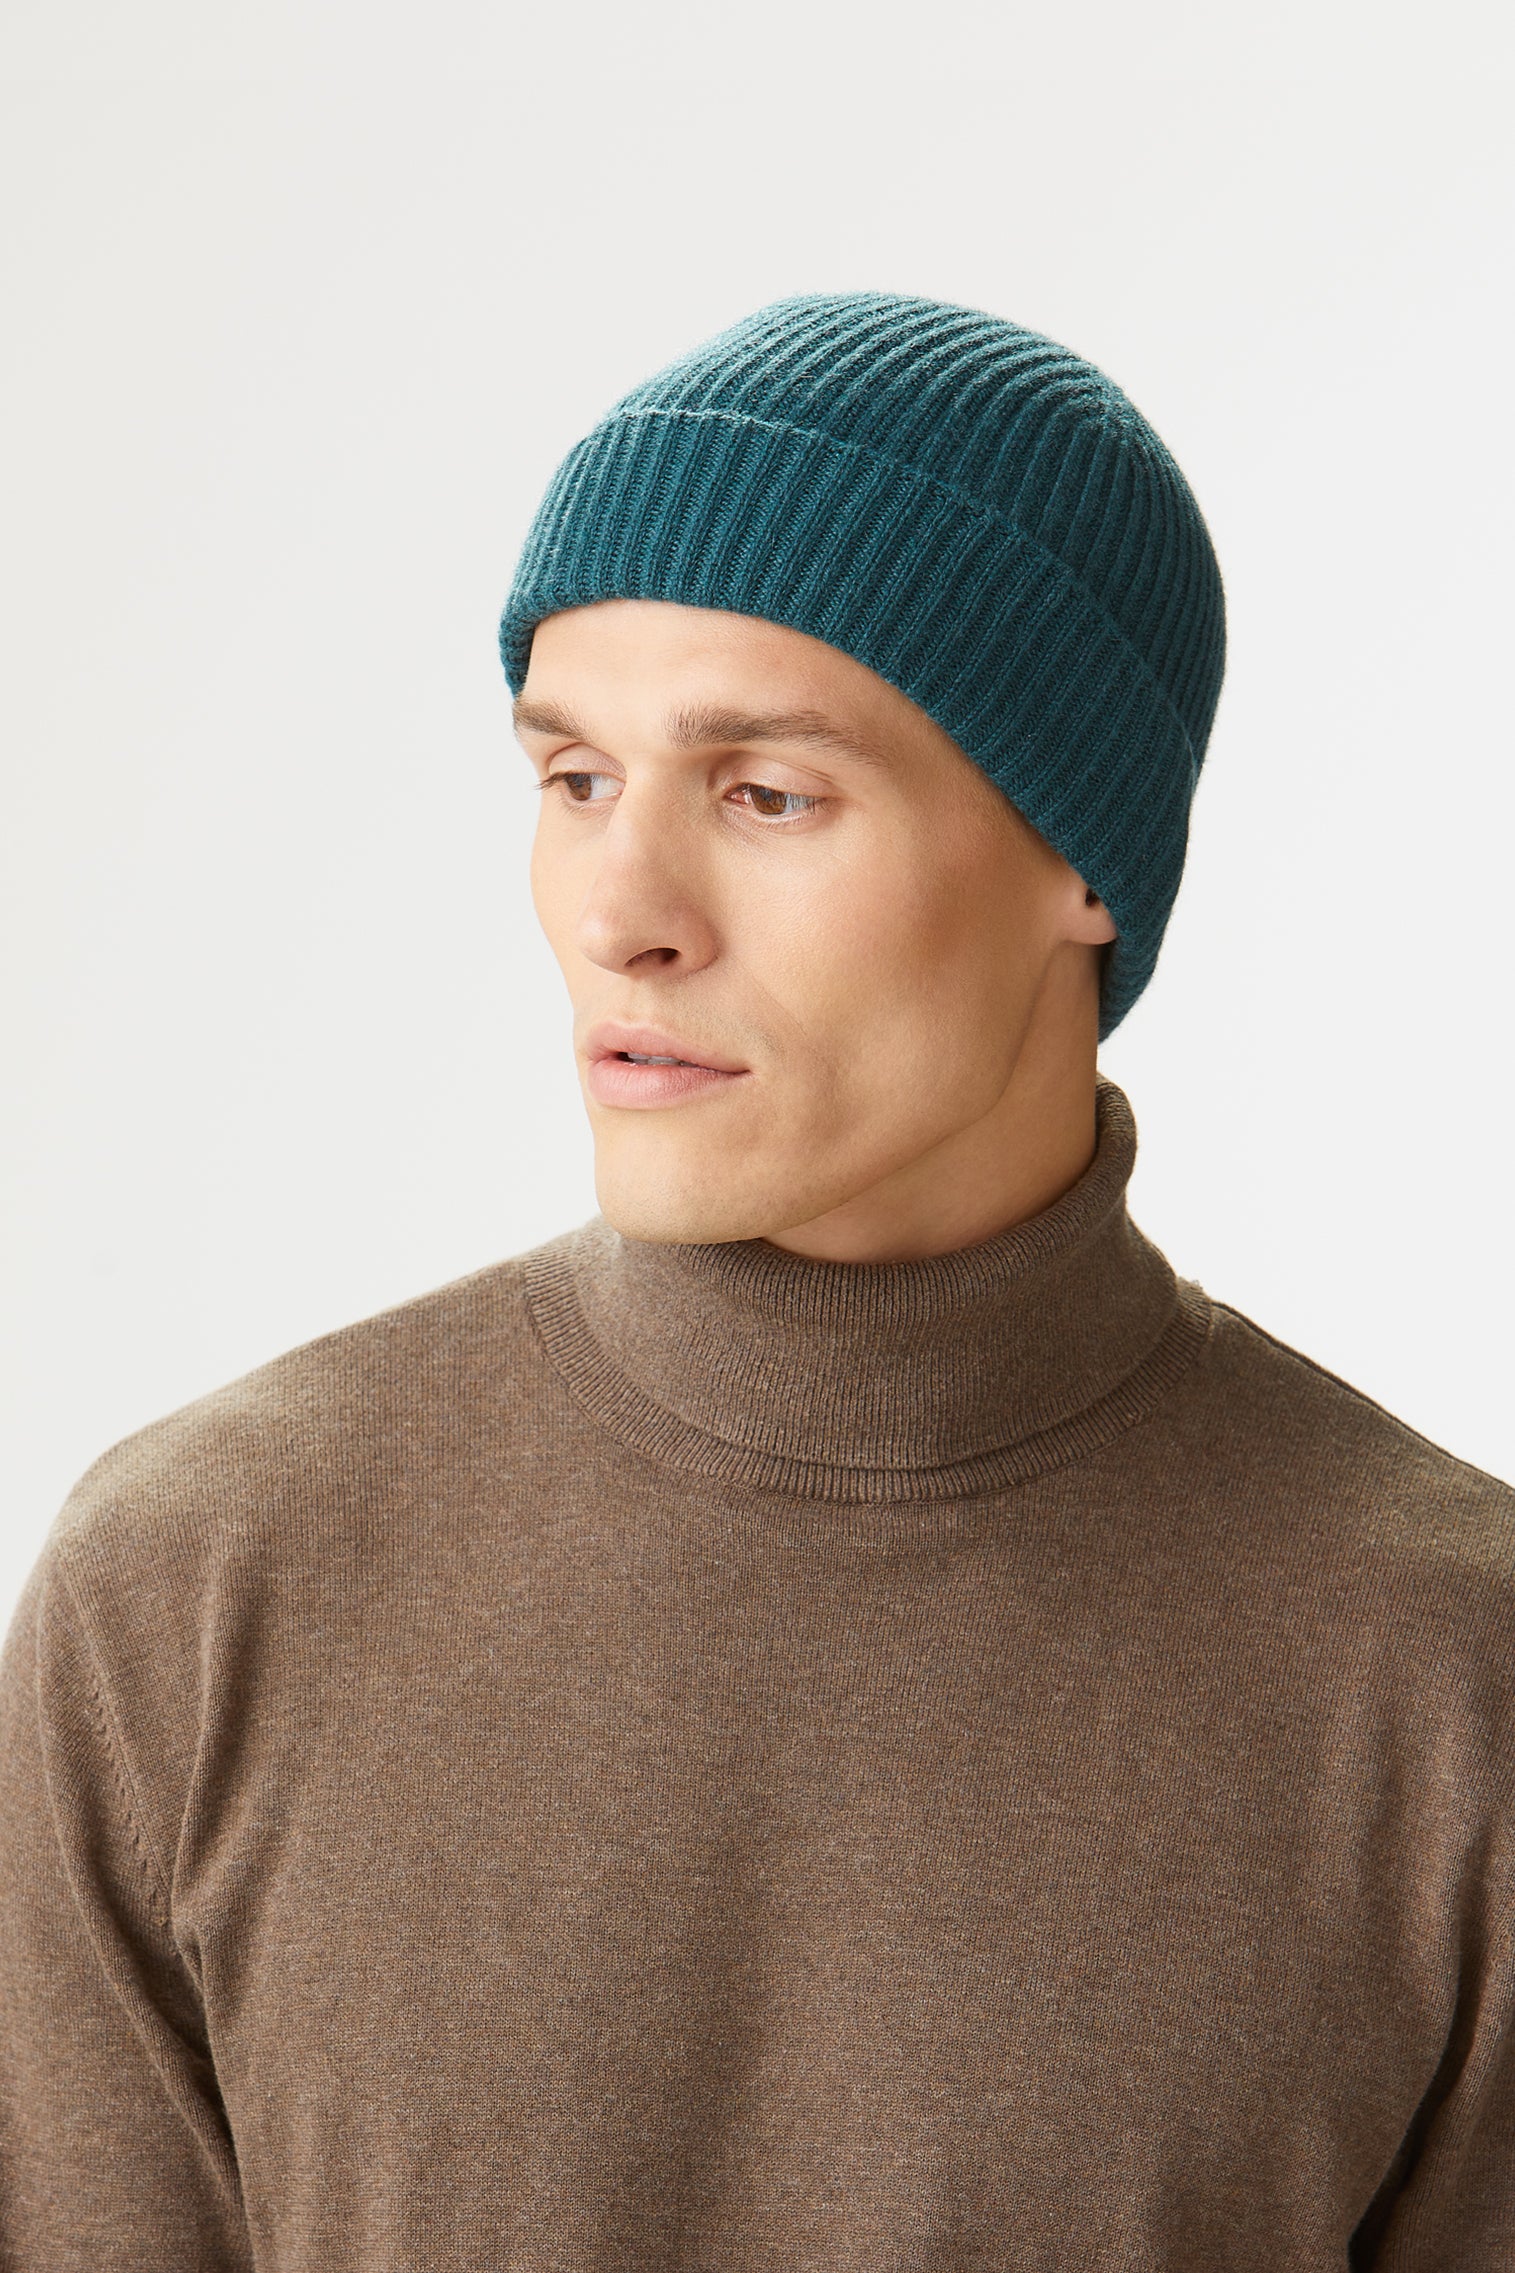 Green Cashmere Ski Beanie - Products - Lock & Co. Hatters London UK